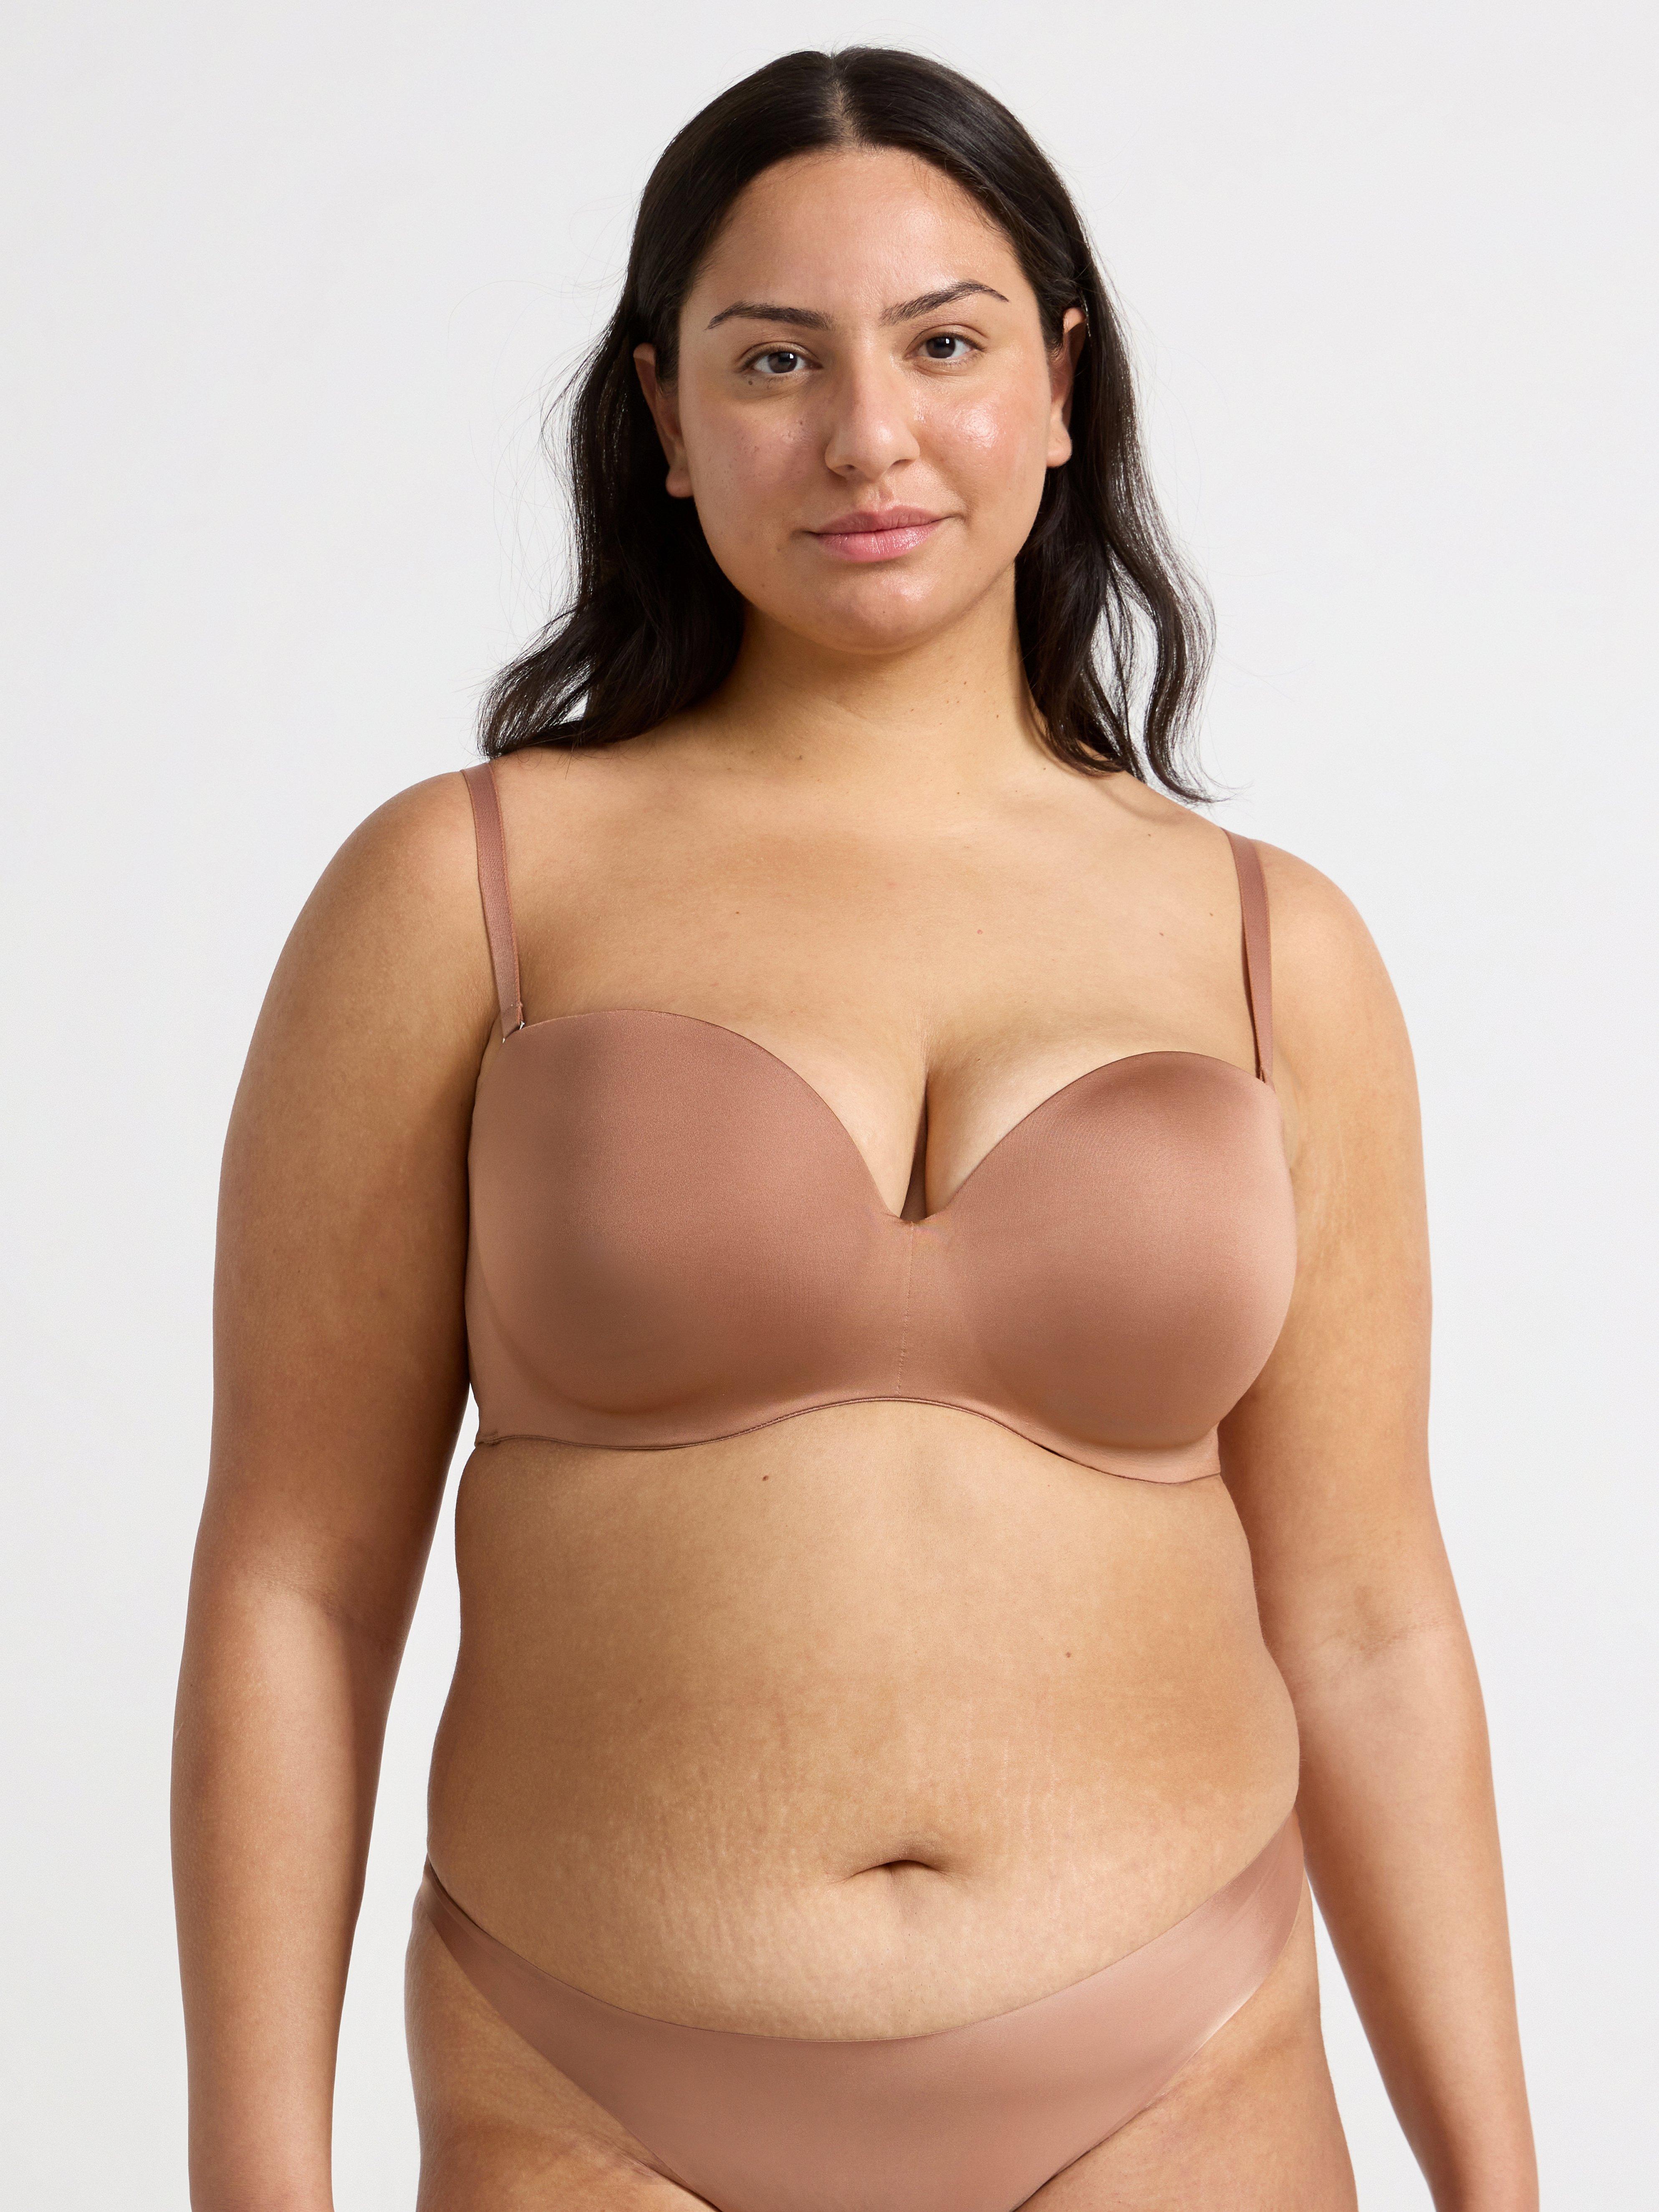 Lindex - Here you go. 20 % off all bras will have your